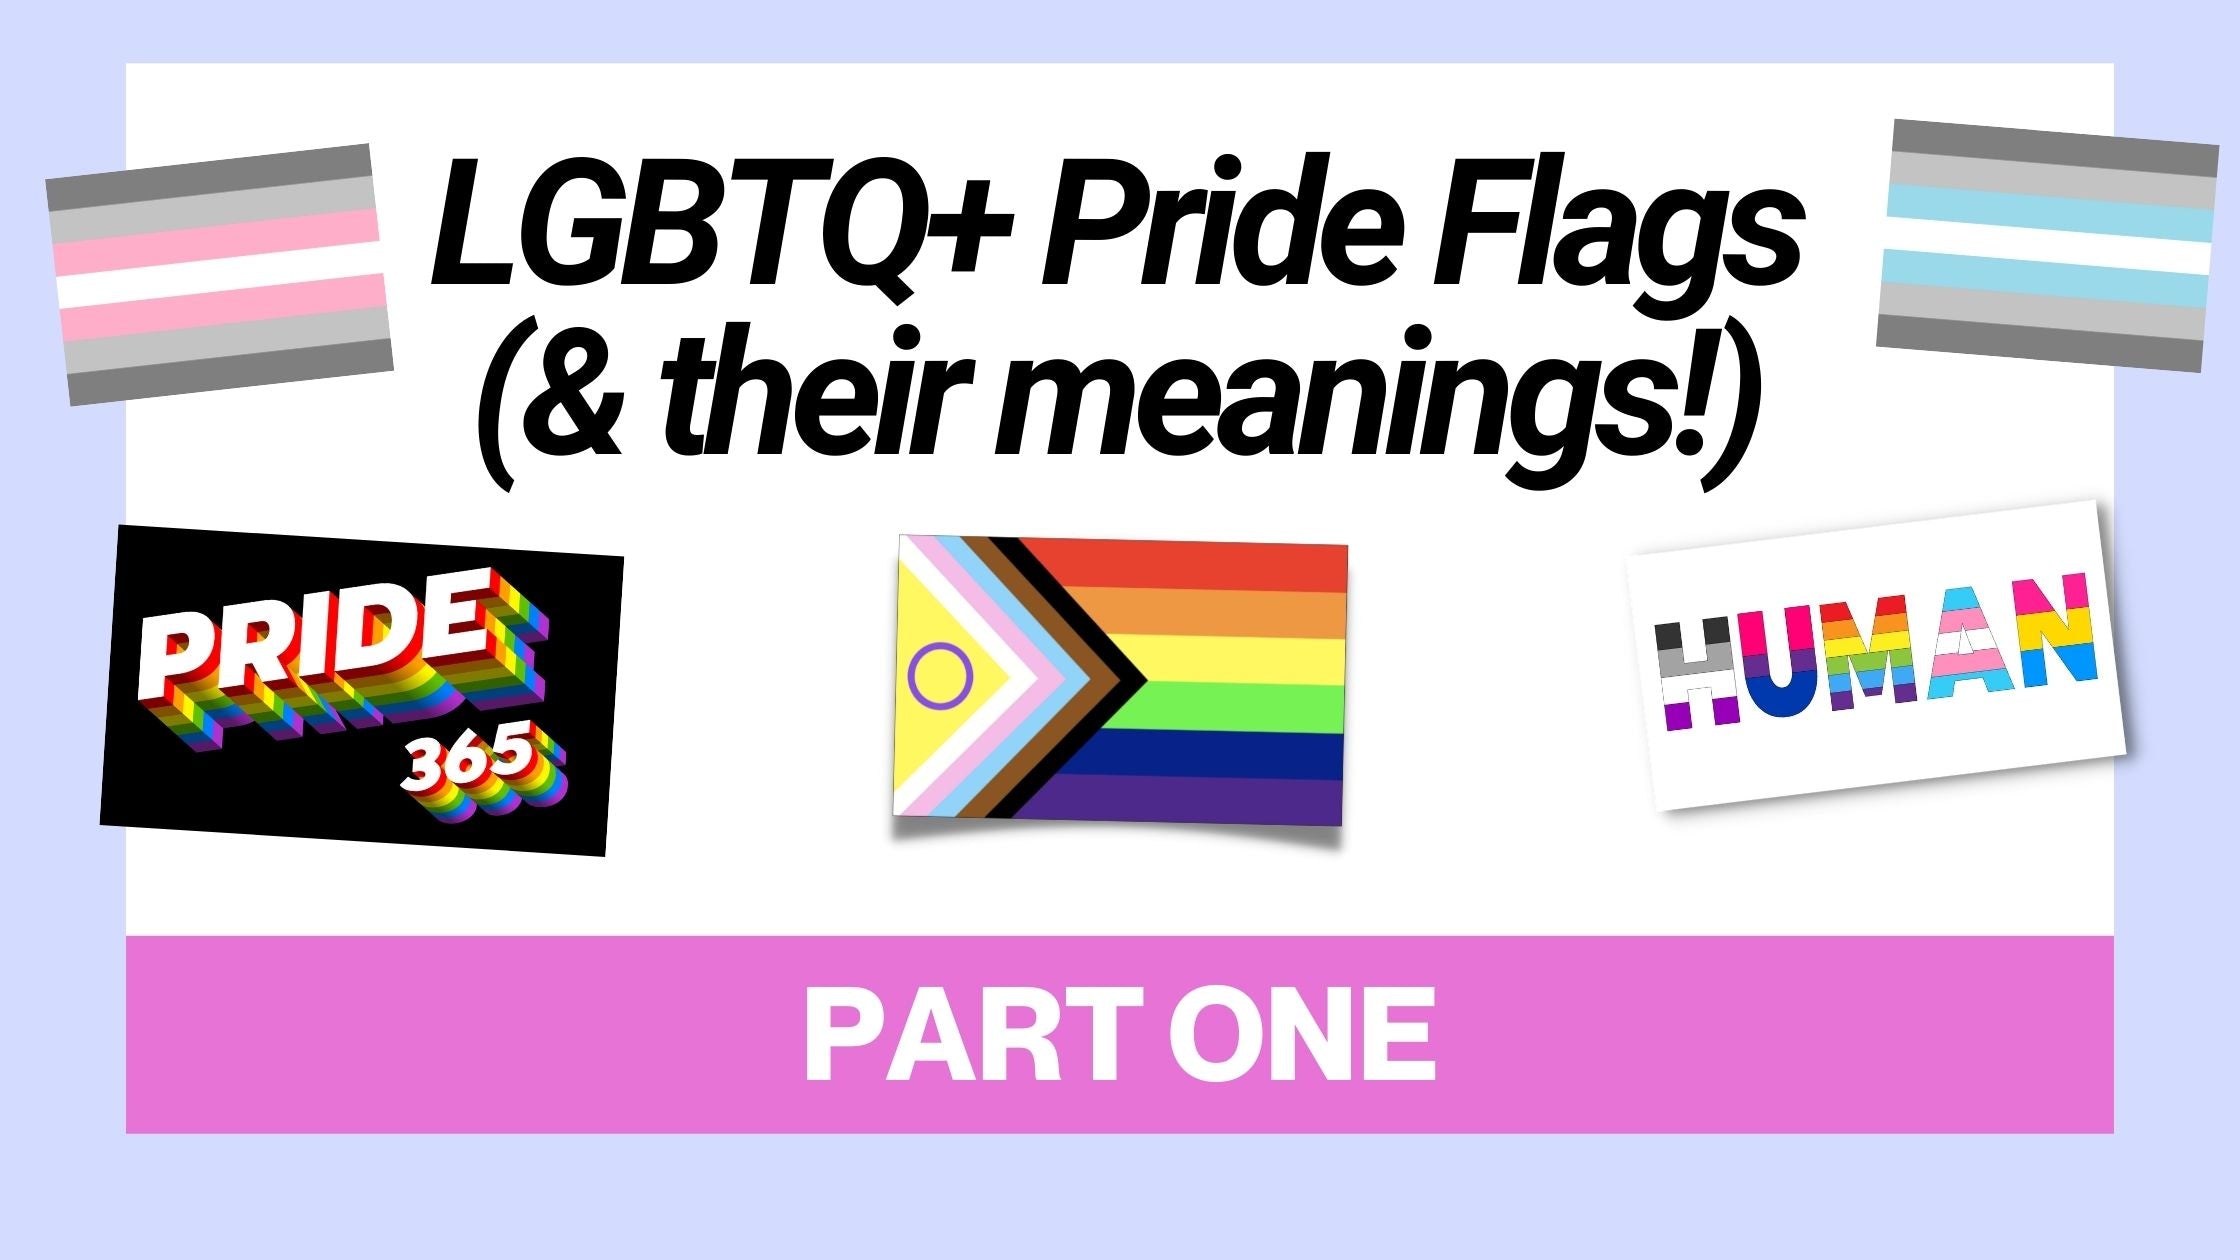 LGBTQ+ Pride Flags & Their Meanings